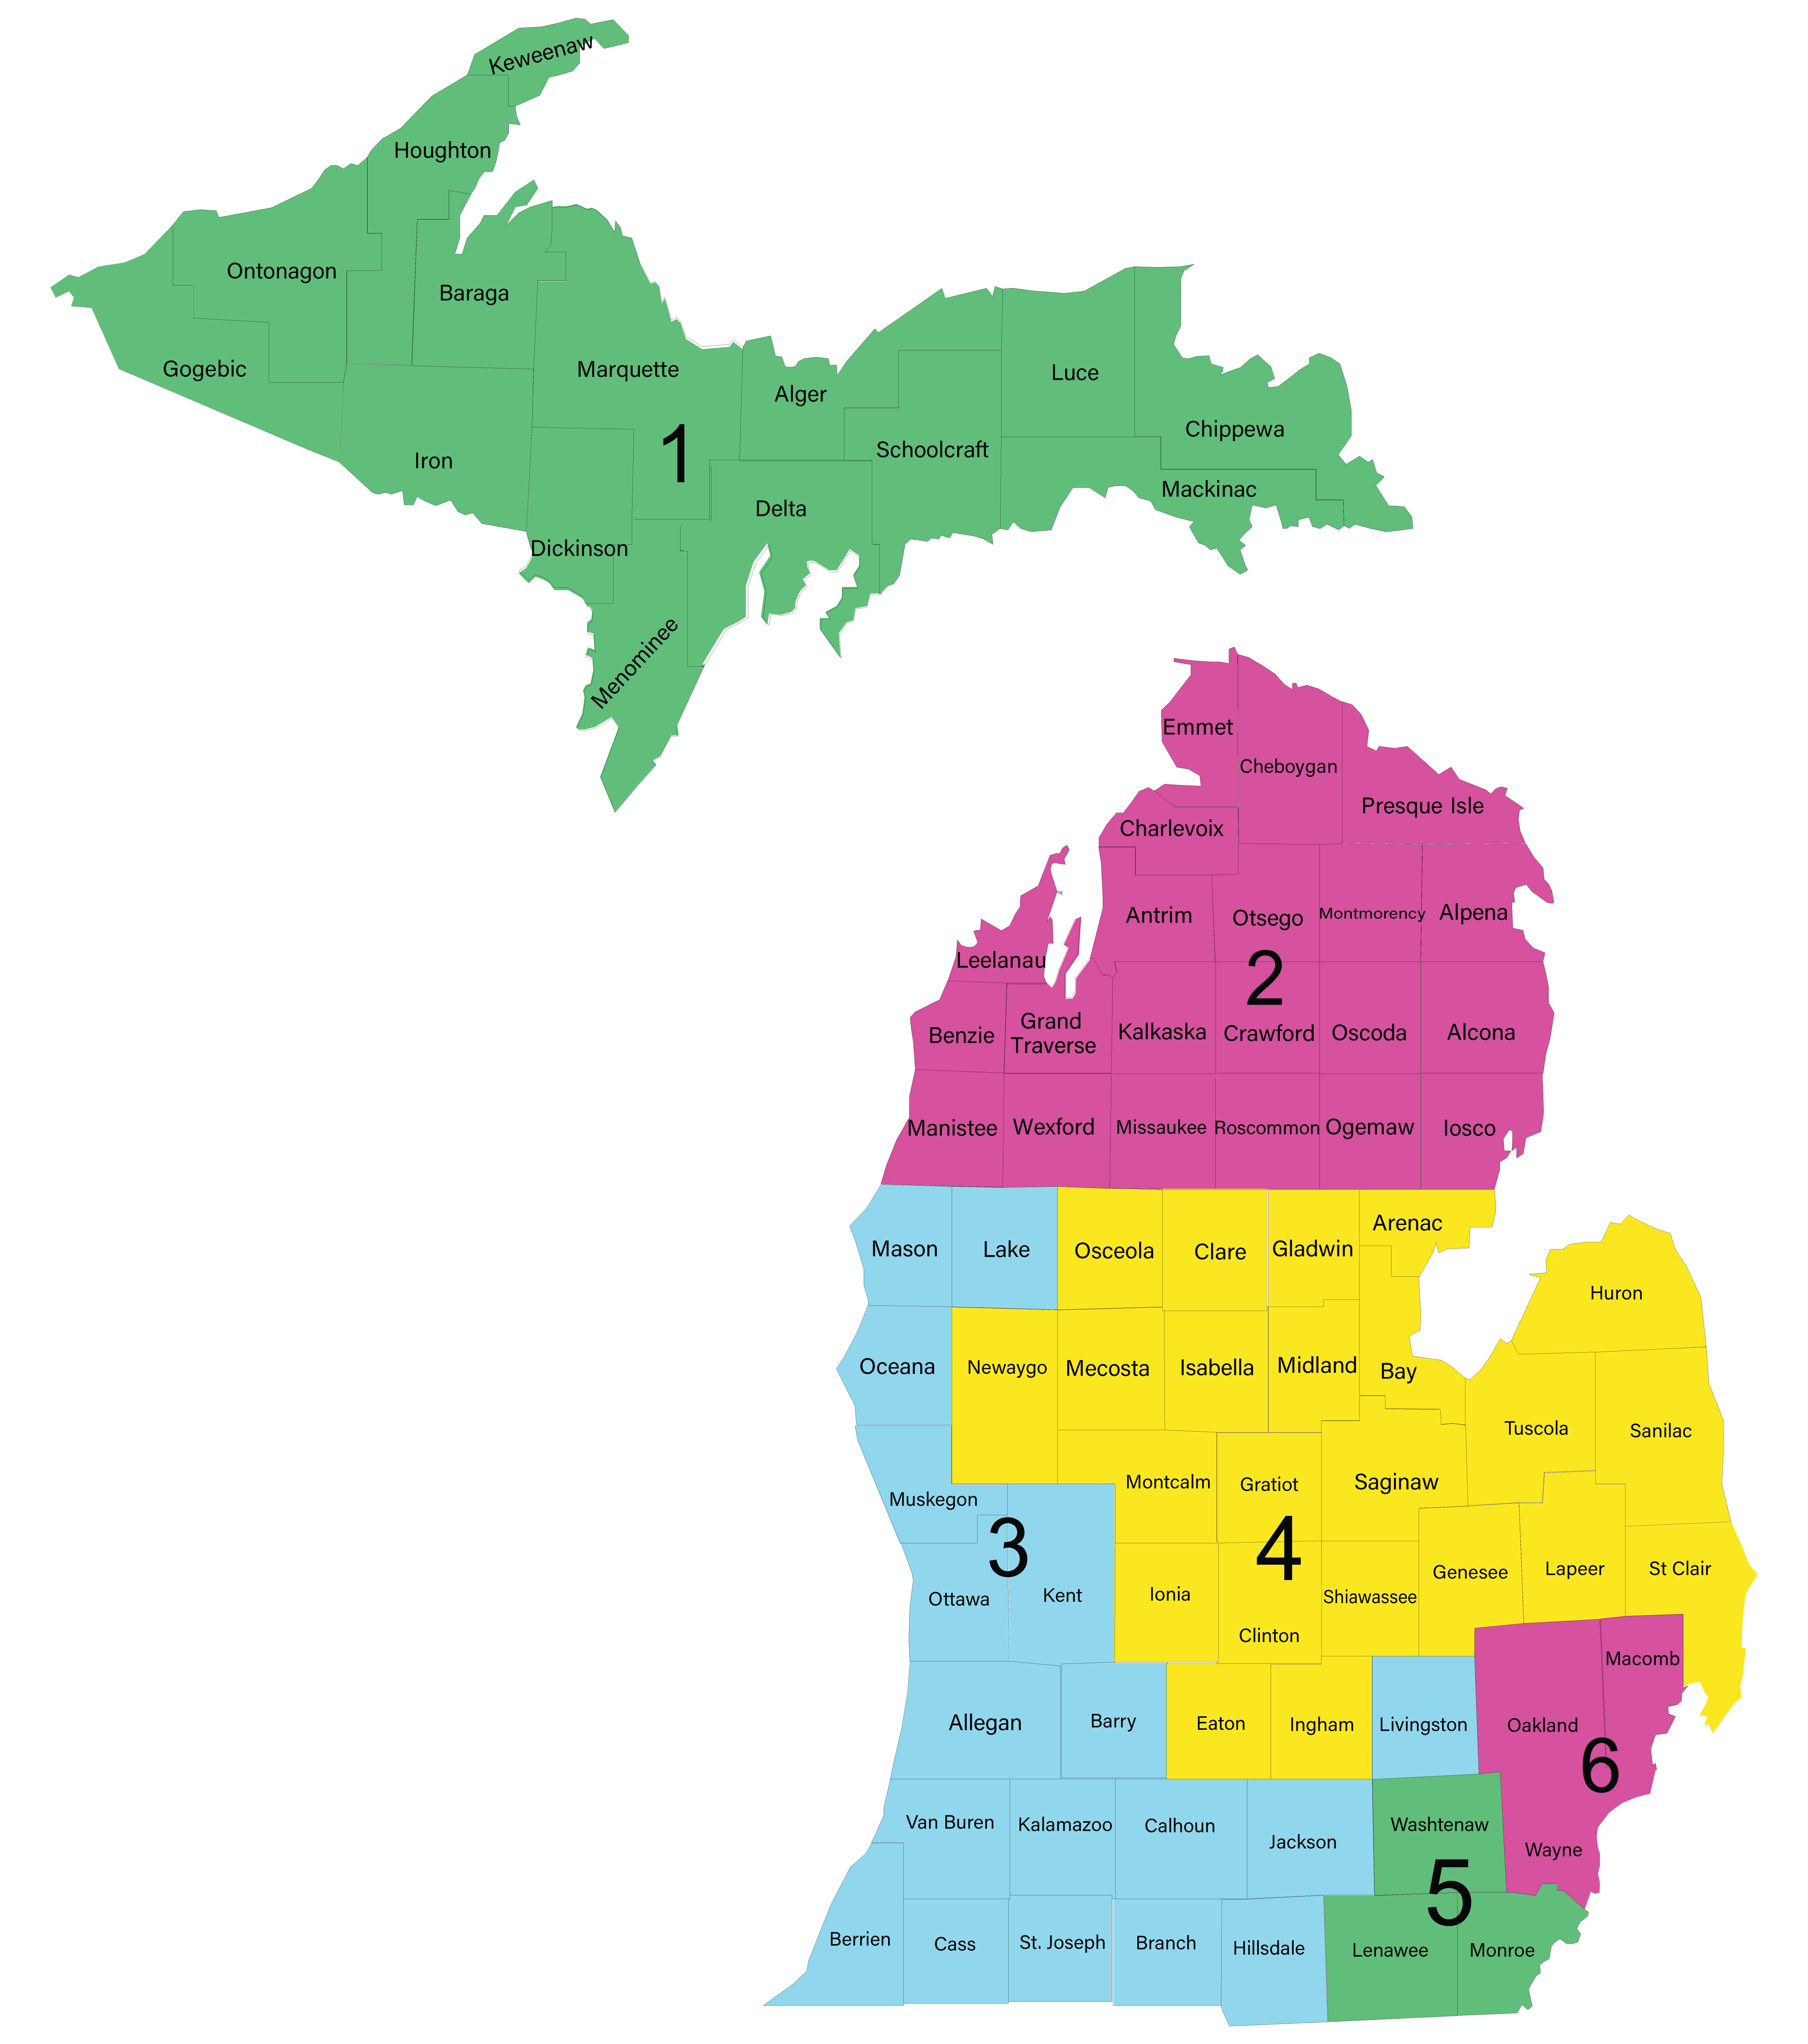 Map of Michigan that is separated into 6 regions showing the different regions each BHC covers. Region 1 is the Upper Peninsula and is covered by Melissa DeMarse. Region 2 is Northern Lower Michigan and is covered by Tim Hudson. Region 3 is Western Michigan and is covered by Megan Collett. Region 4 is Central Michigan and is covered by Katrina Hernandez. Region 5 is Lenawee, Washtenaw, and Monroe Counties and is covered by Melissa DeMarse. Region 6 is Wayne, Oakland, & Macomb Counties and is covered by Tim Hudson.